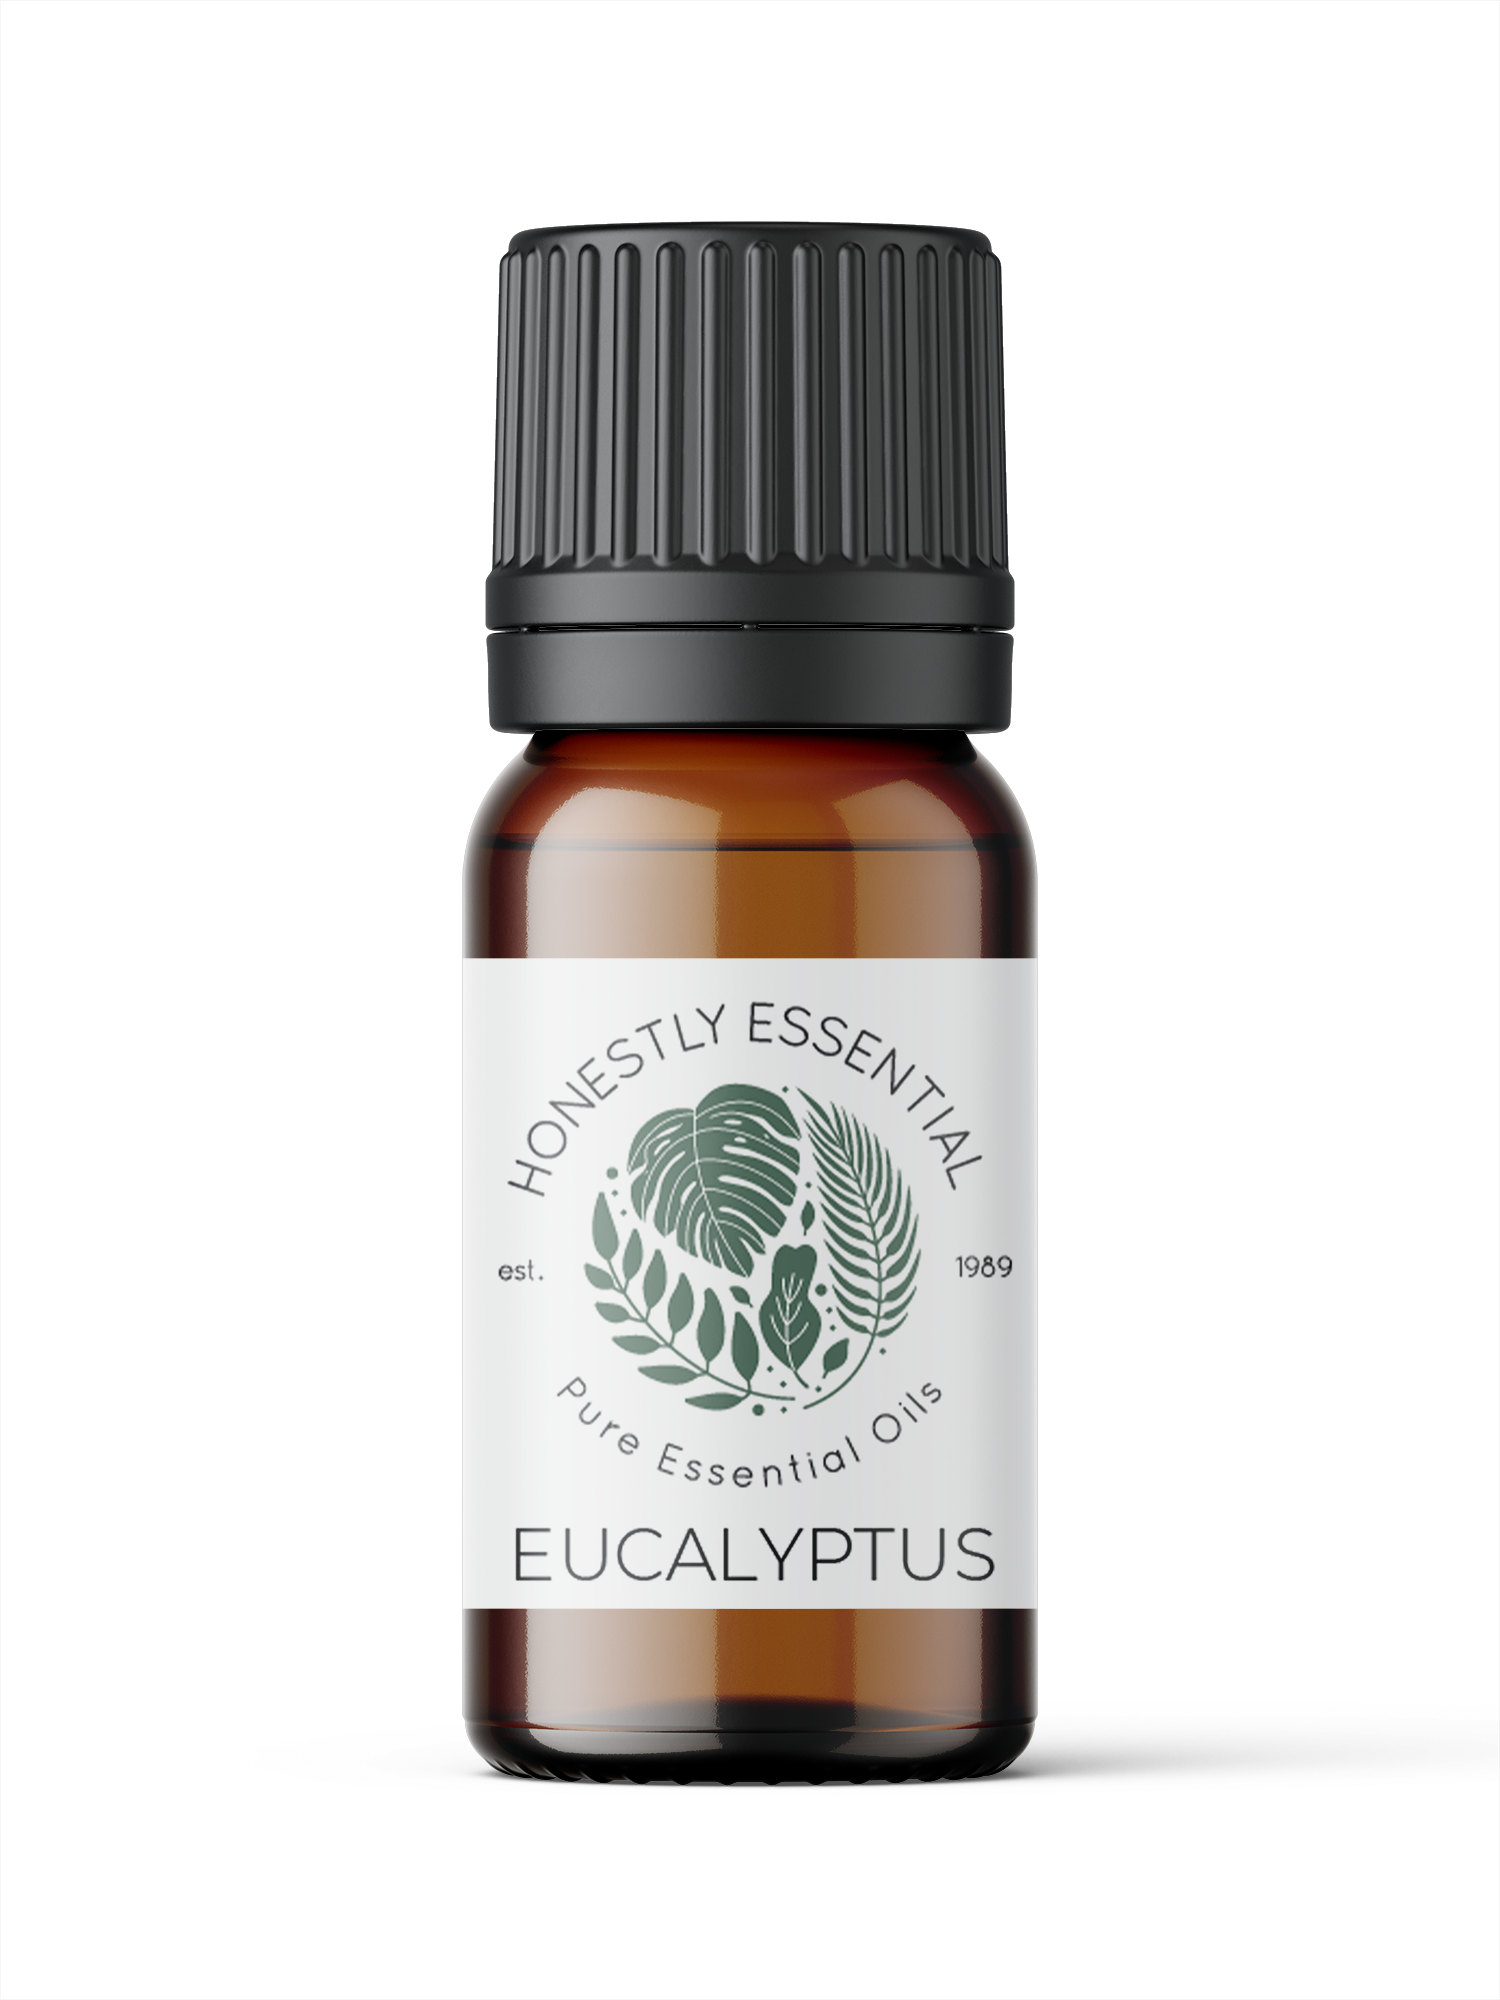 Eucalyptus Essential Oil - Essential Oils | Honestly Essential Oils immunity, Insect and Pest Repellent, kid safe, pain, pain reliever, tree, tree essential oil, trees